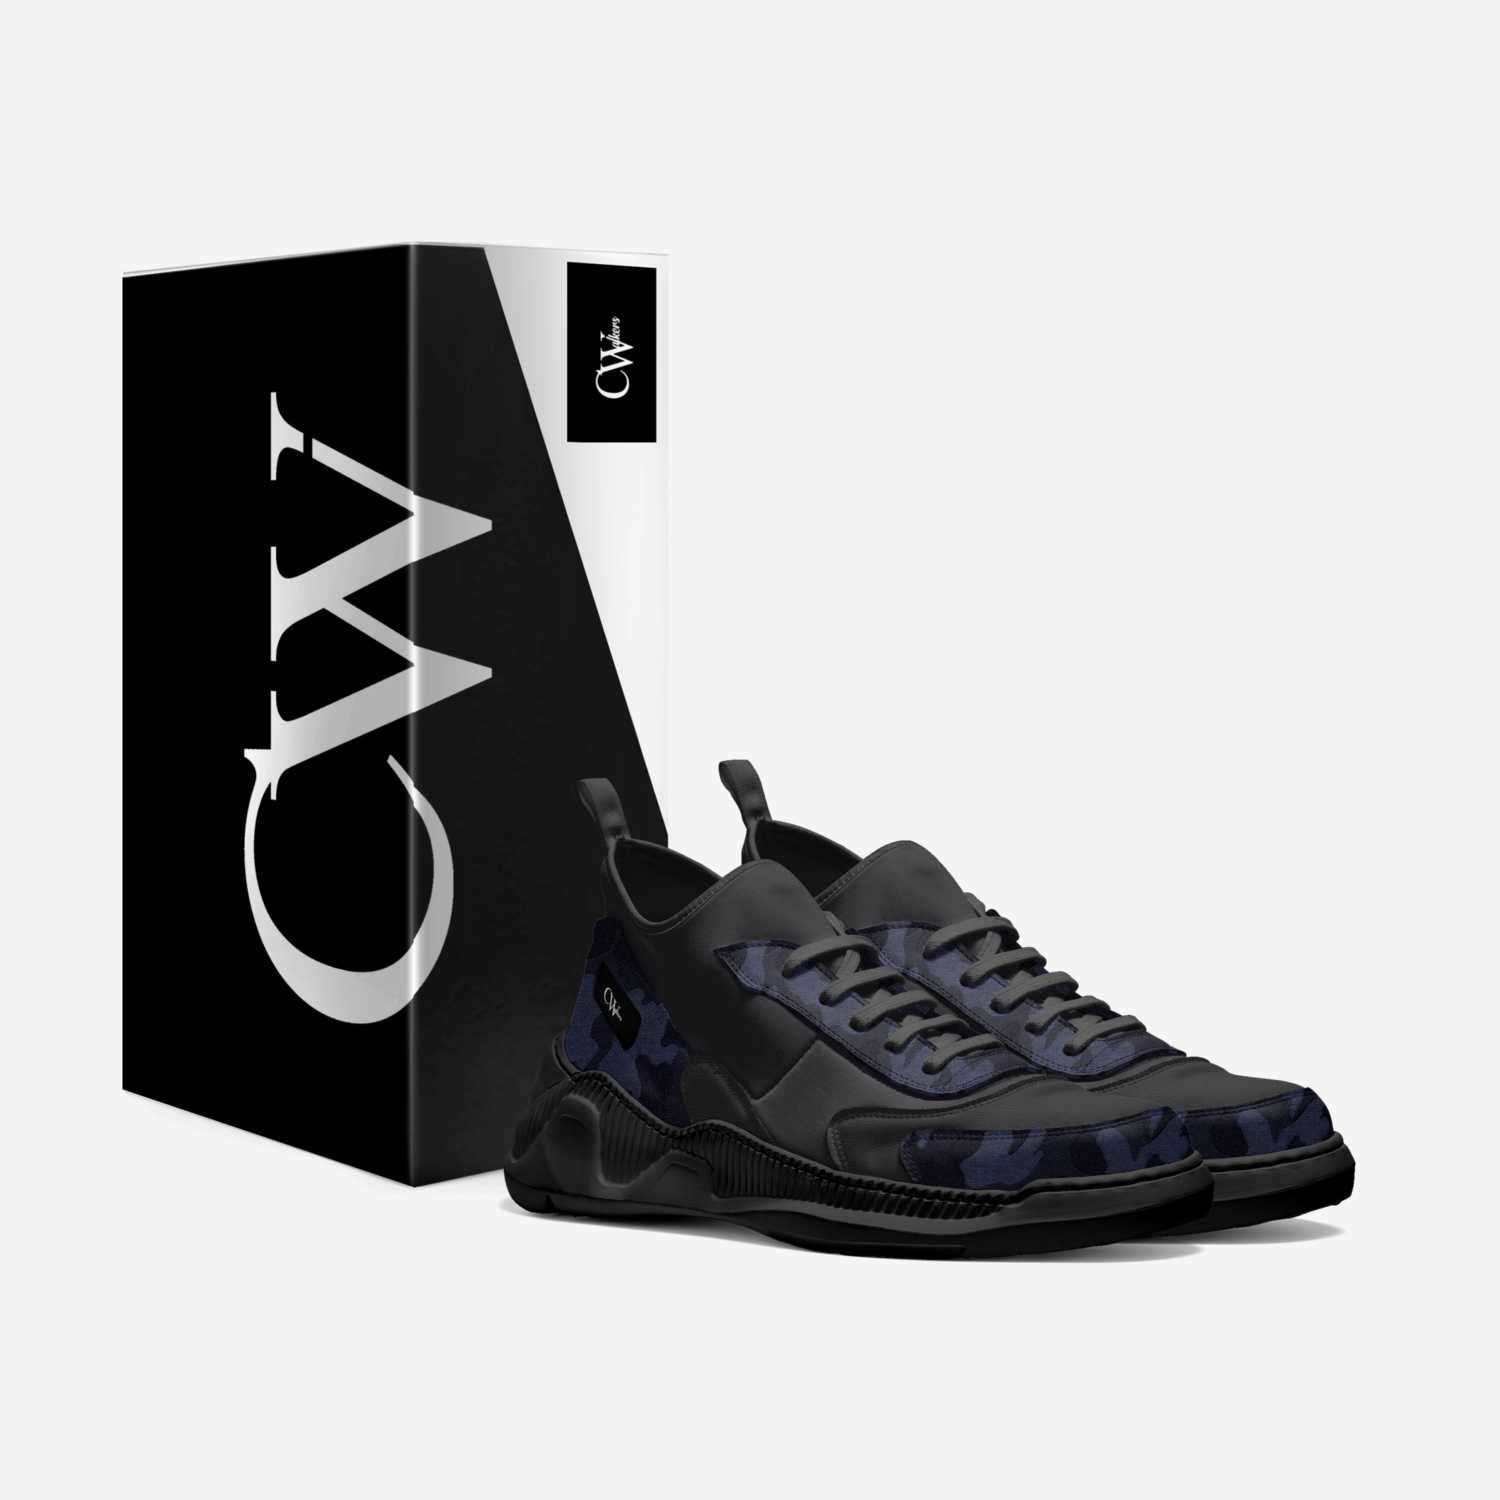 C WALKER'S custom made in Italy shoes by C W | Box view